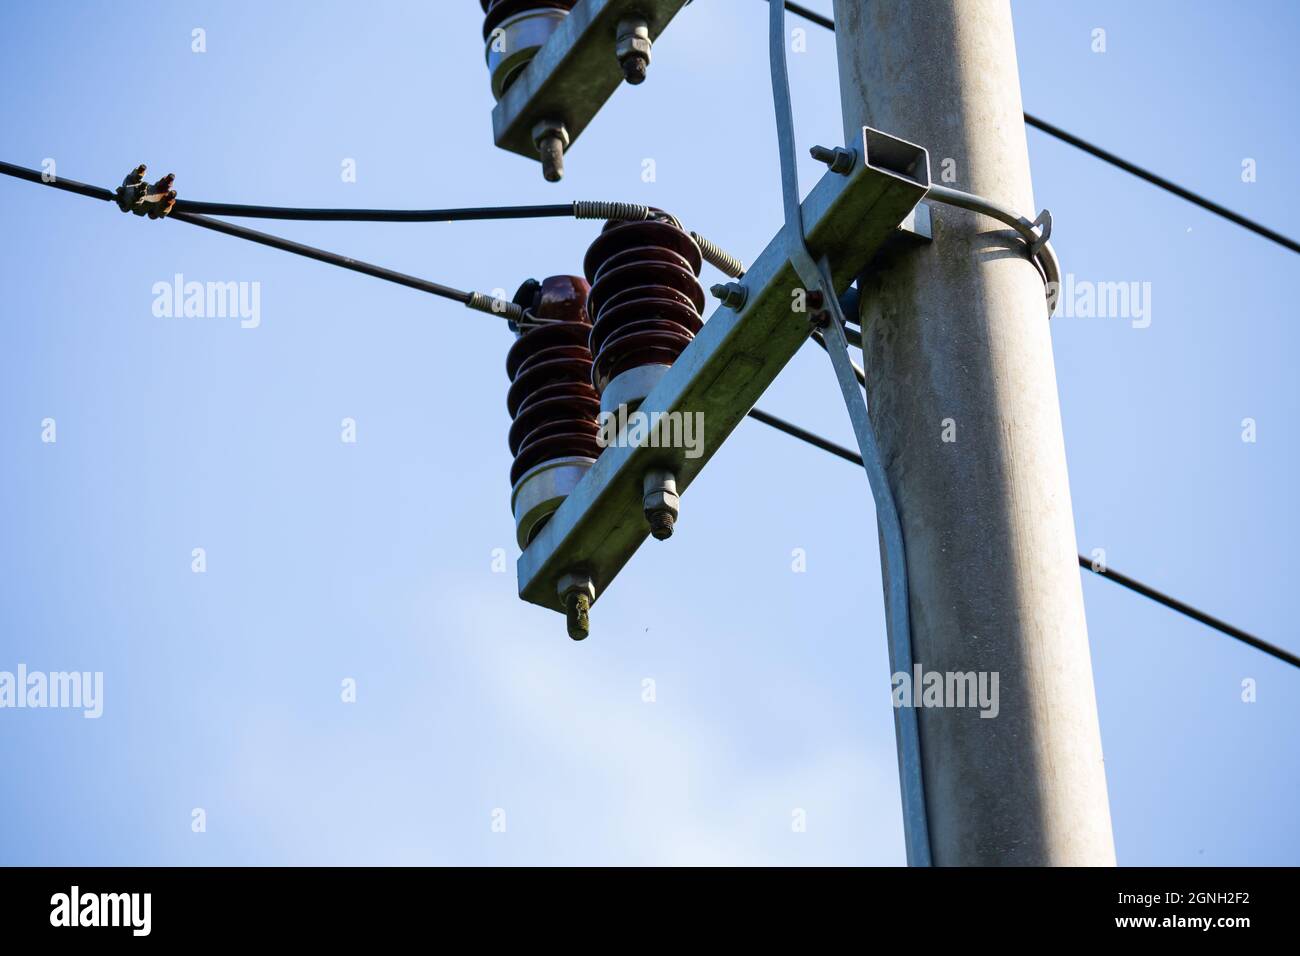 Ceramic insulators on low voltage pylons. Photo taken in good lighting conditions on a sunny day. Stock Photo